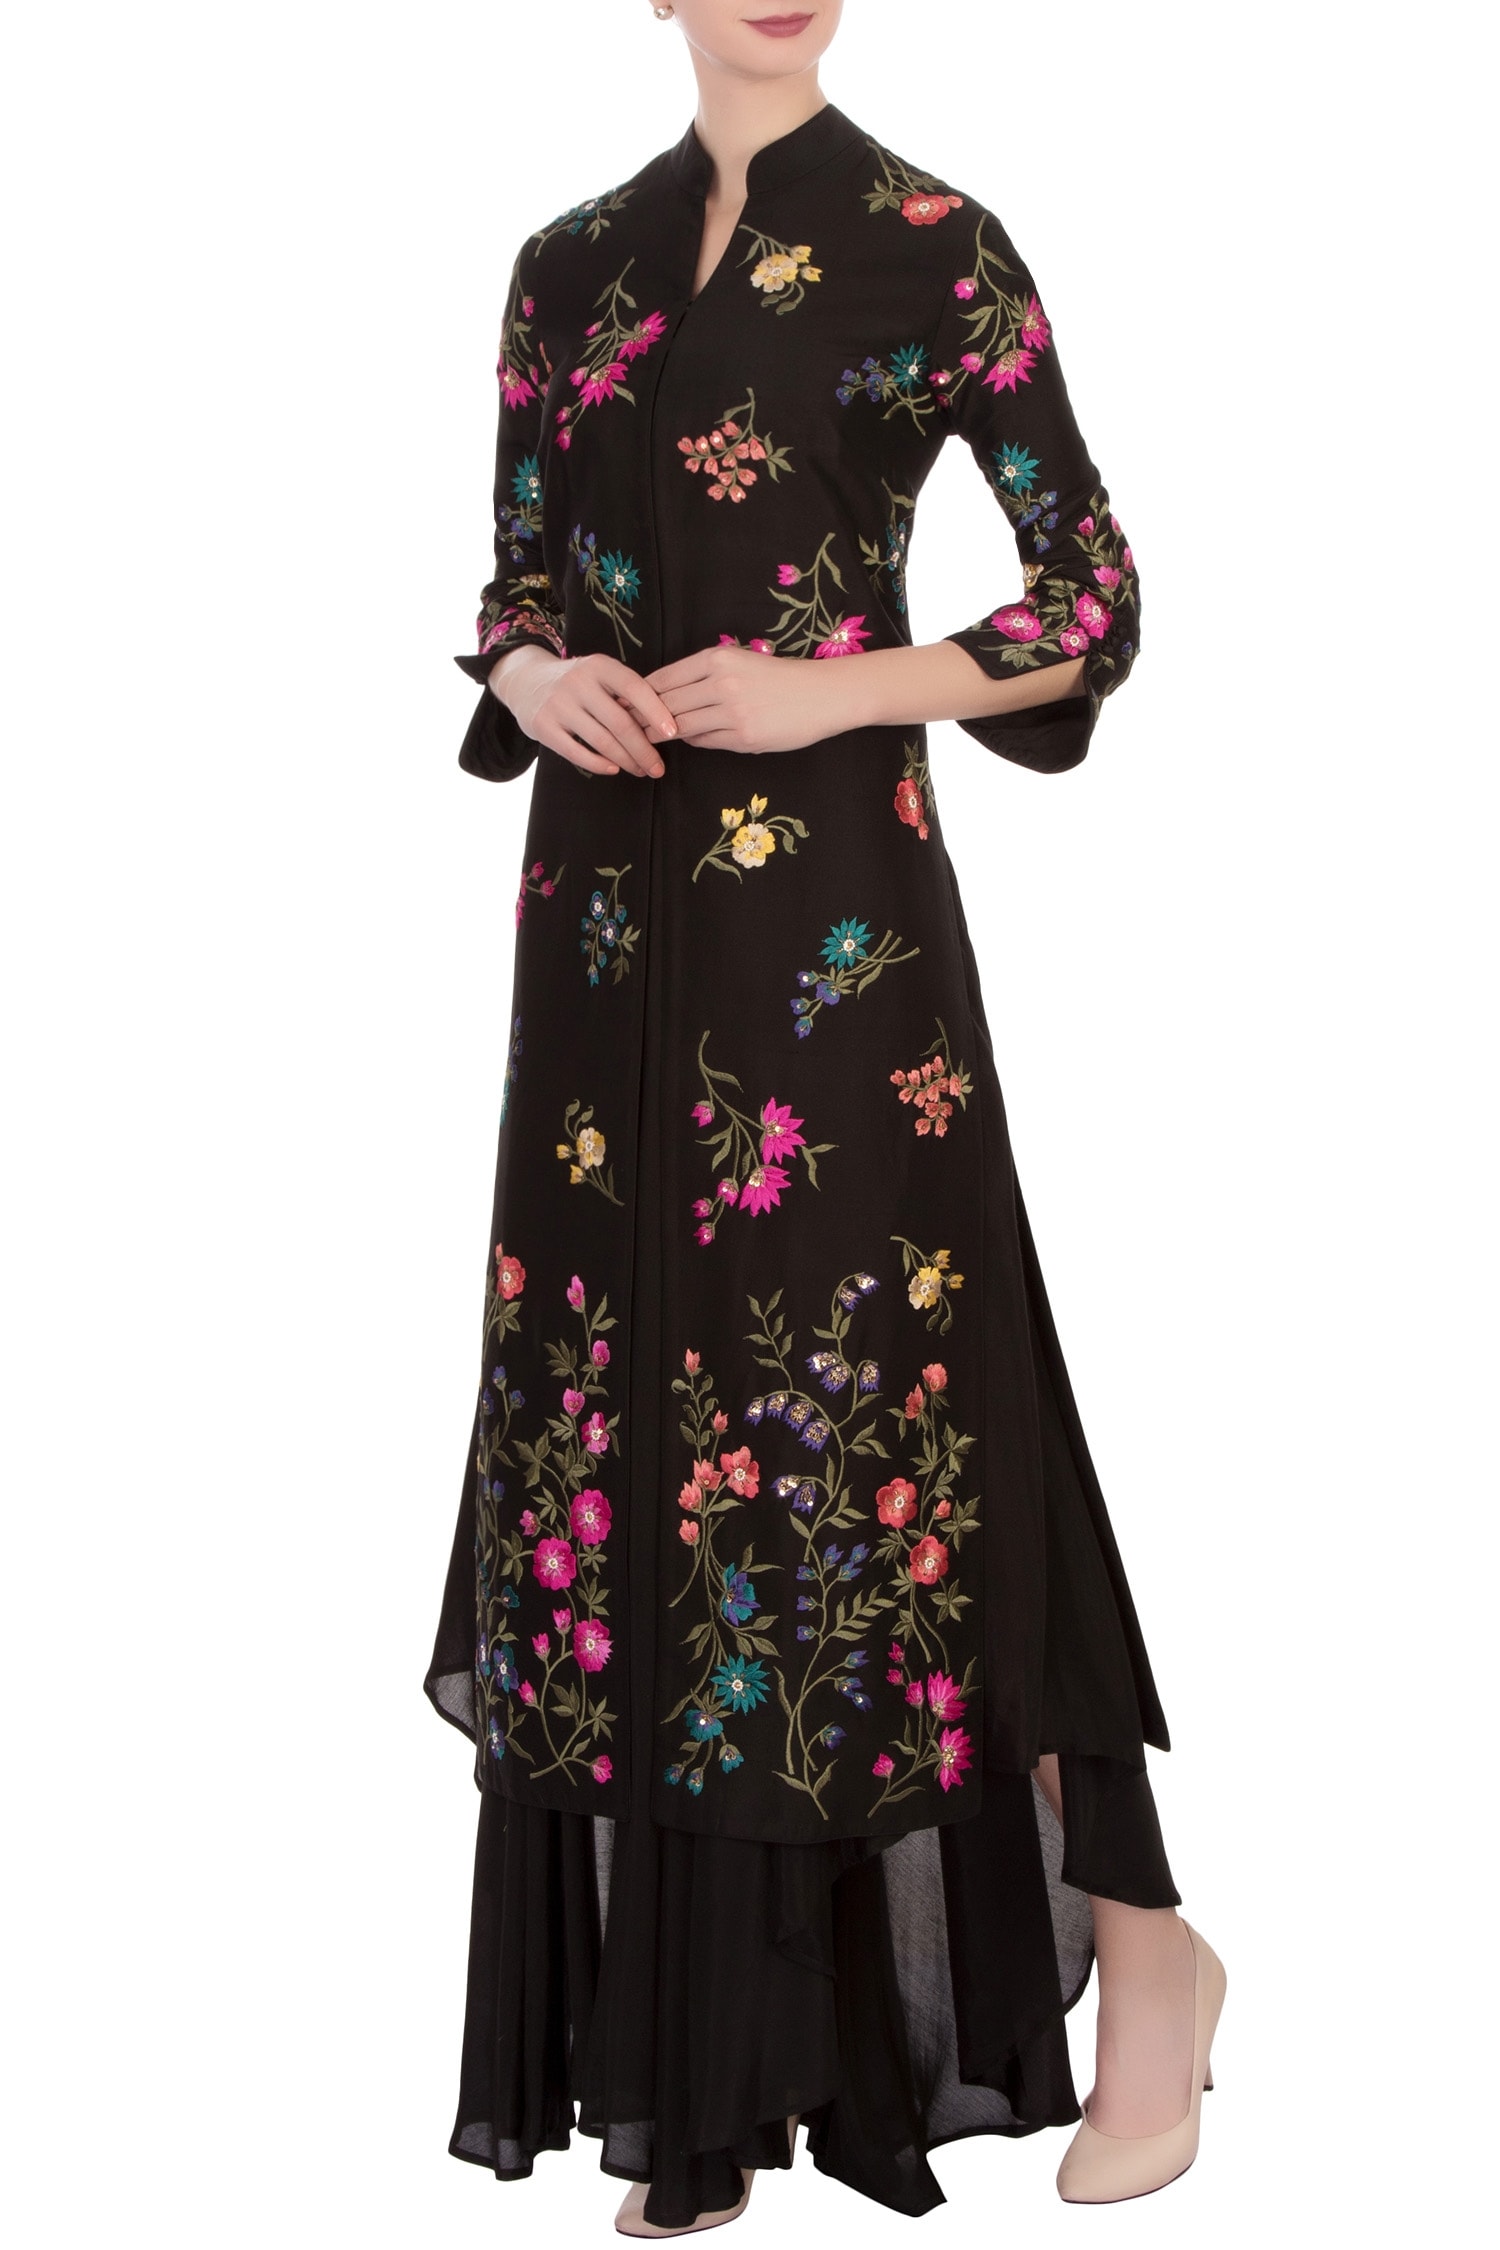 Aqube by Amber Black Floral Embroidered Jacket And Flowy Pants